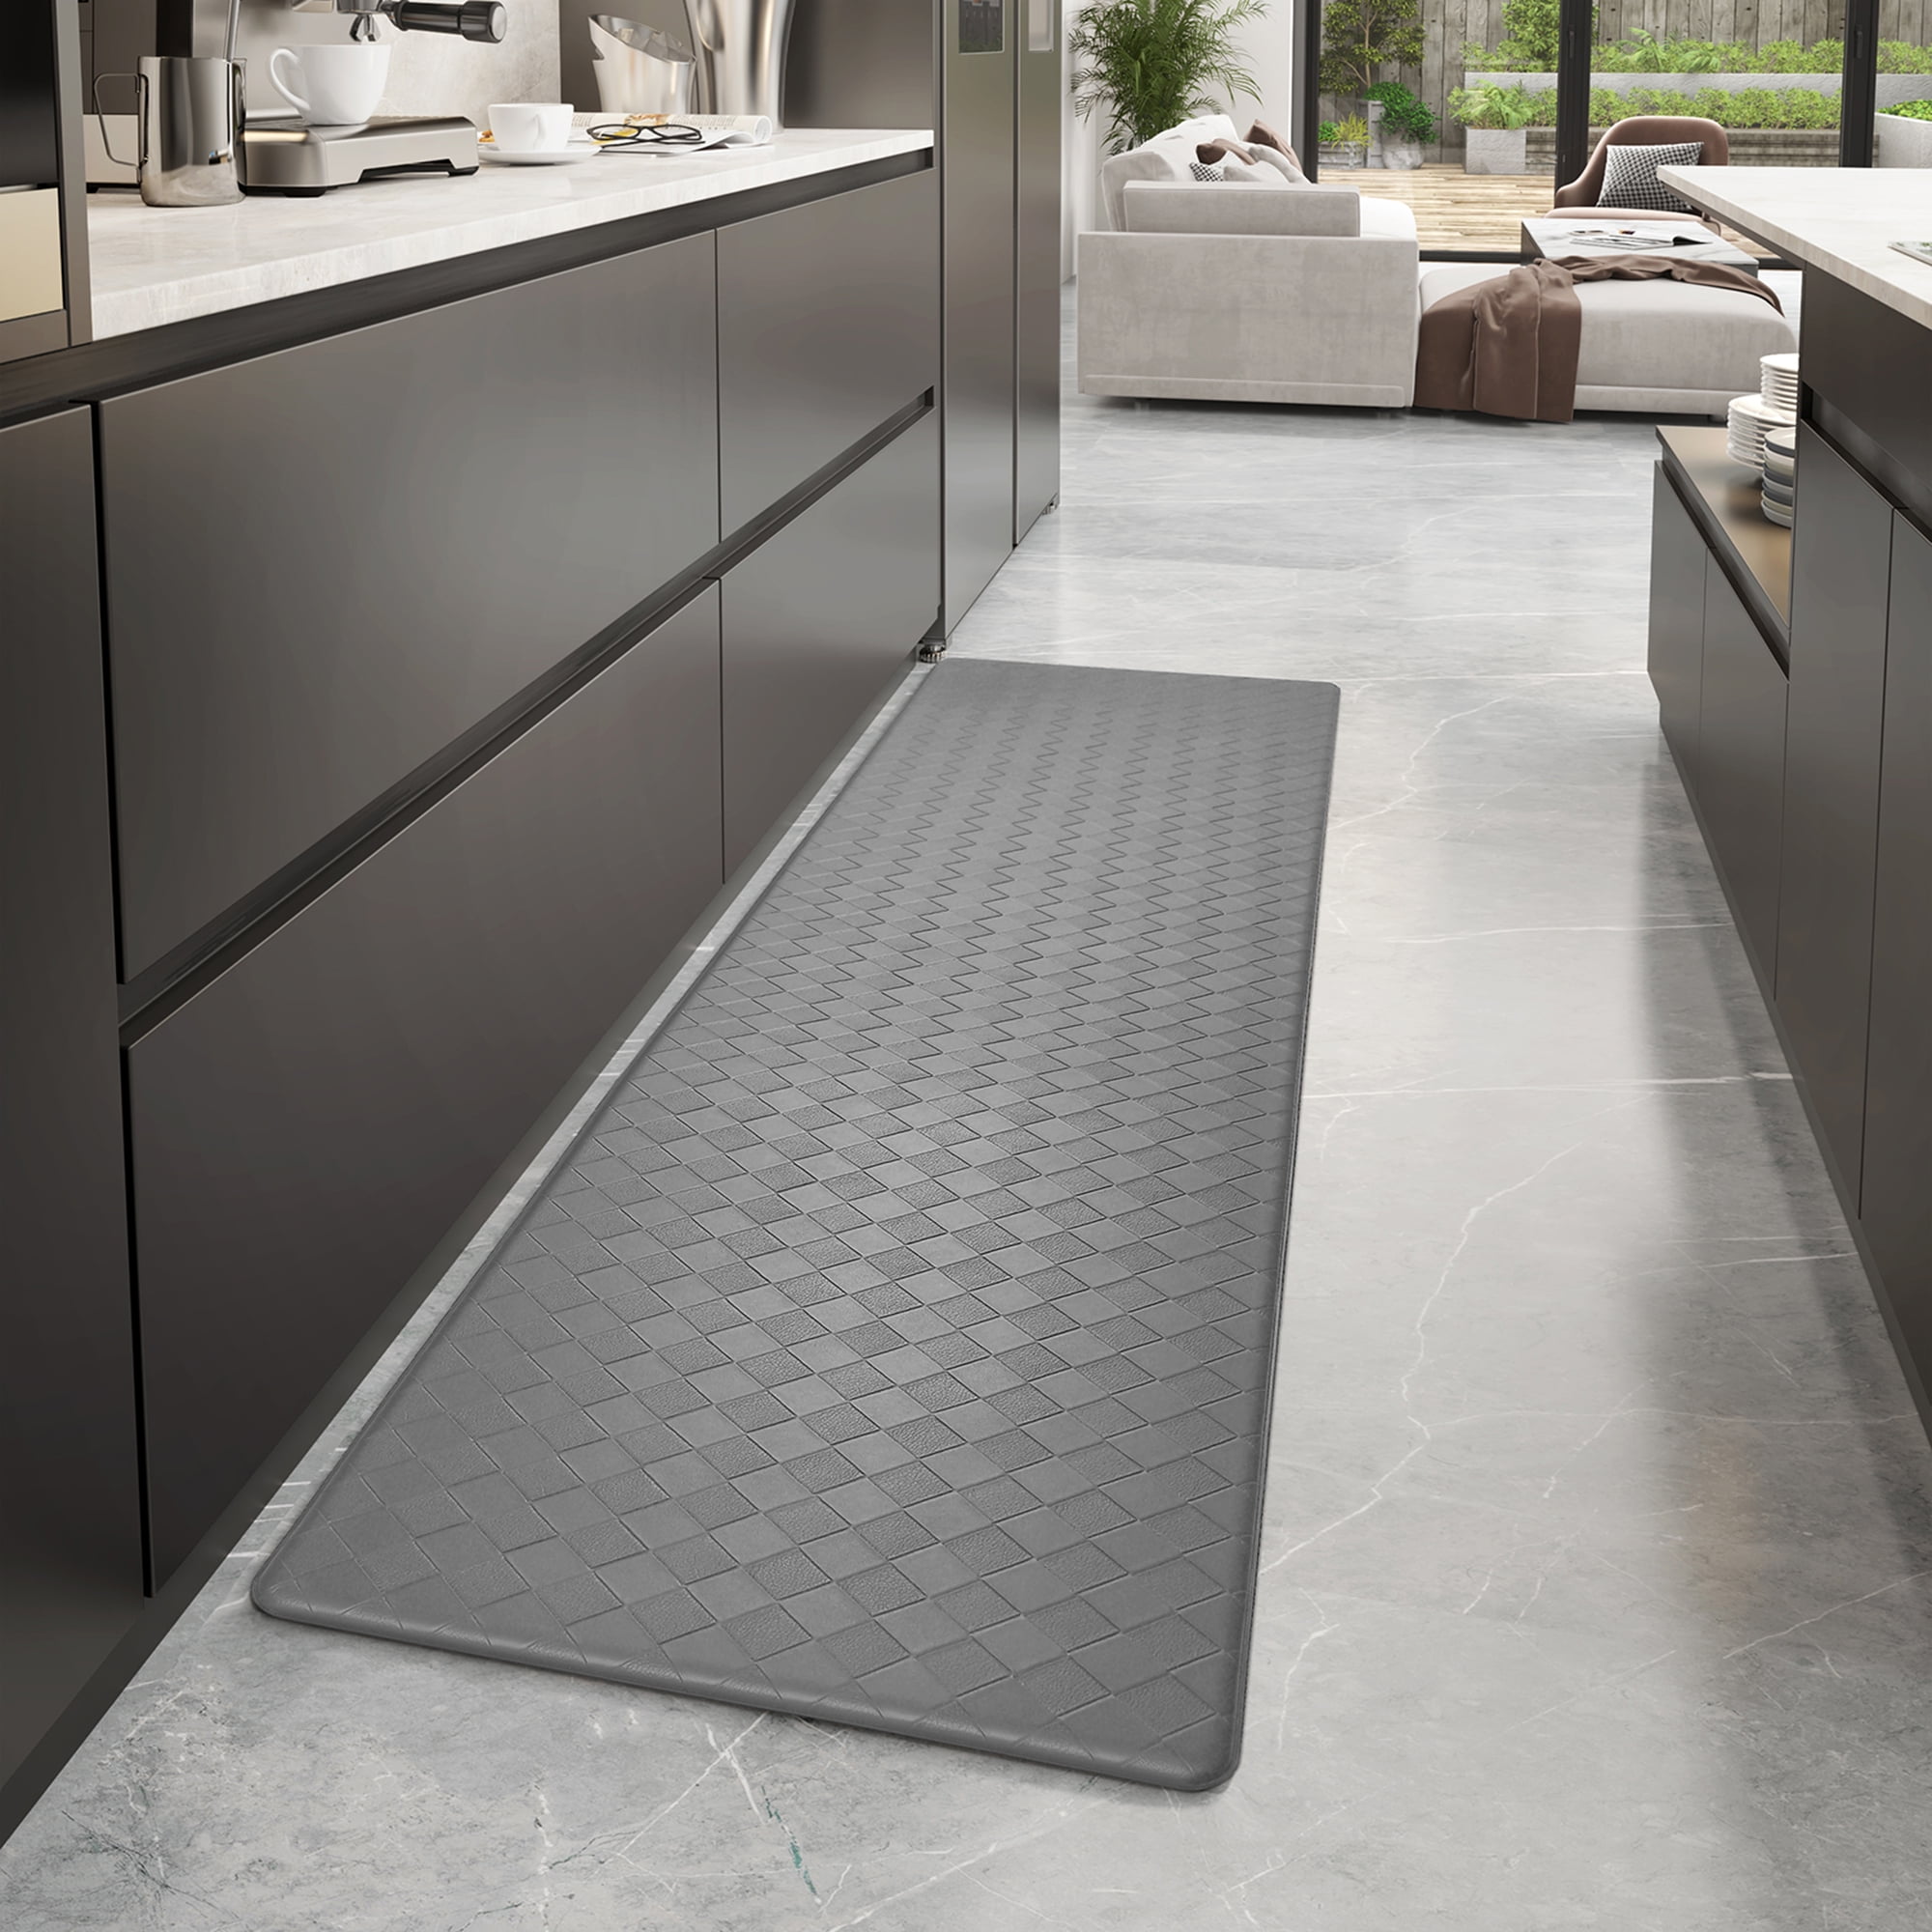 Benissimo-Modern Mats, 24”x56” Ultra-Thin (1/10 Inch) Kitchen Mat Rubber  Backing, Waterproof, Low Profile, Durable&Non Slip, Indoor Floor Mat for